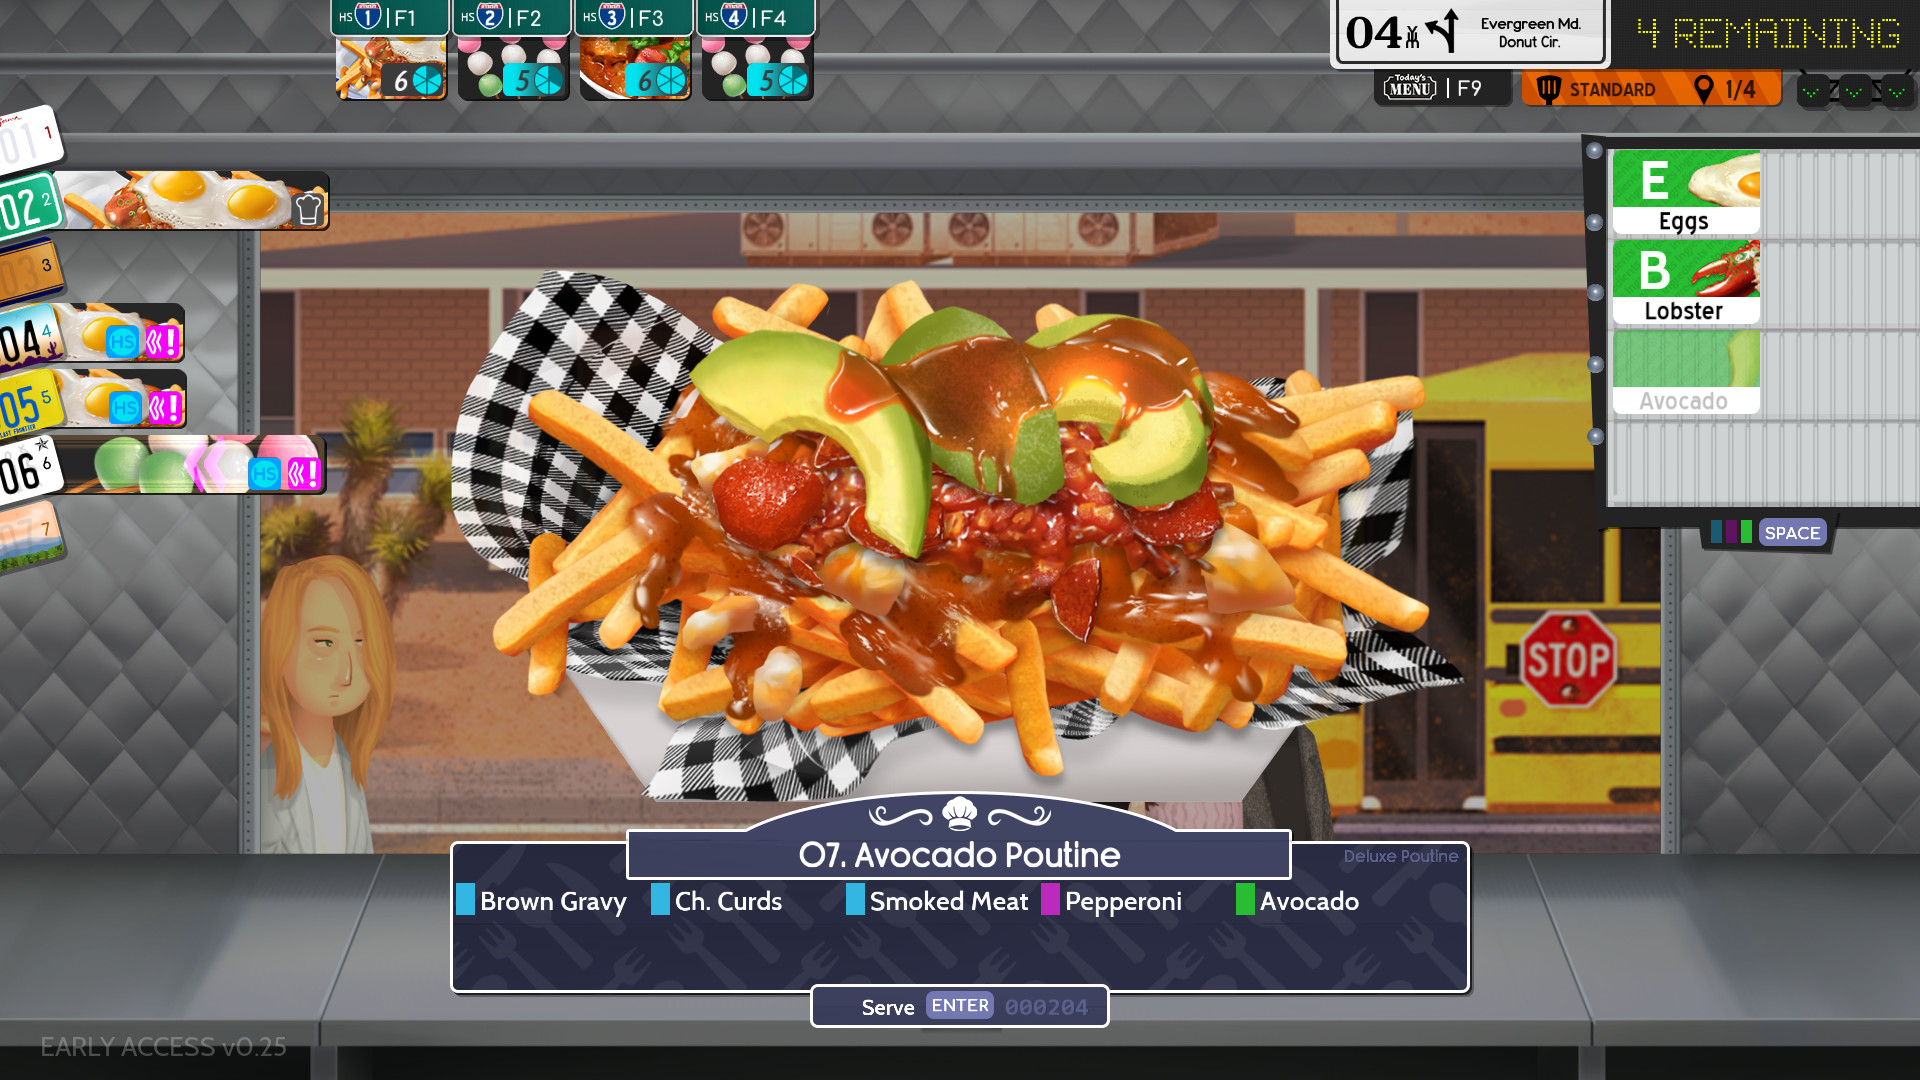 Save 50% on Cook, Serve, Delicious! 3?! on Steam